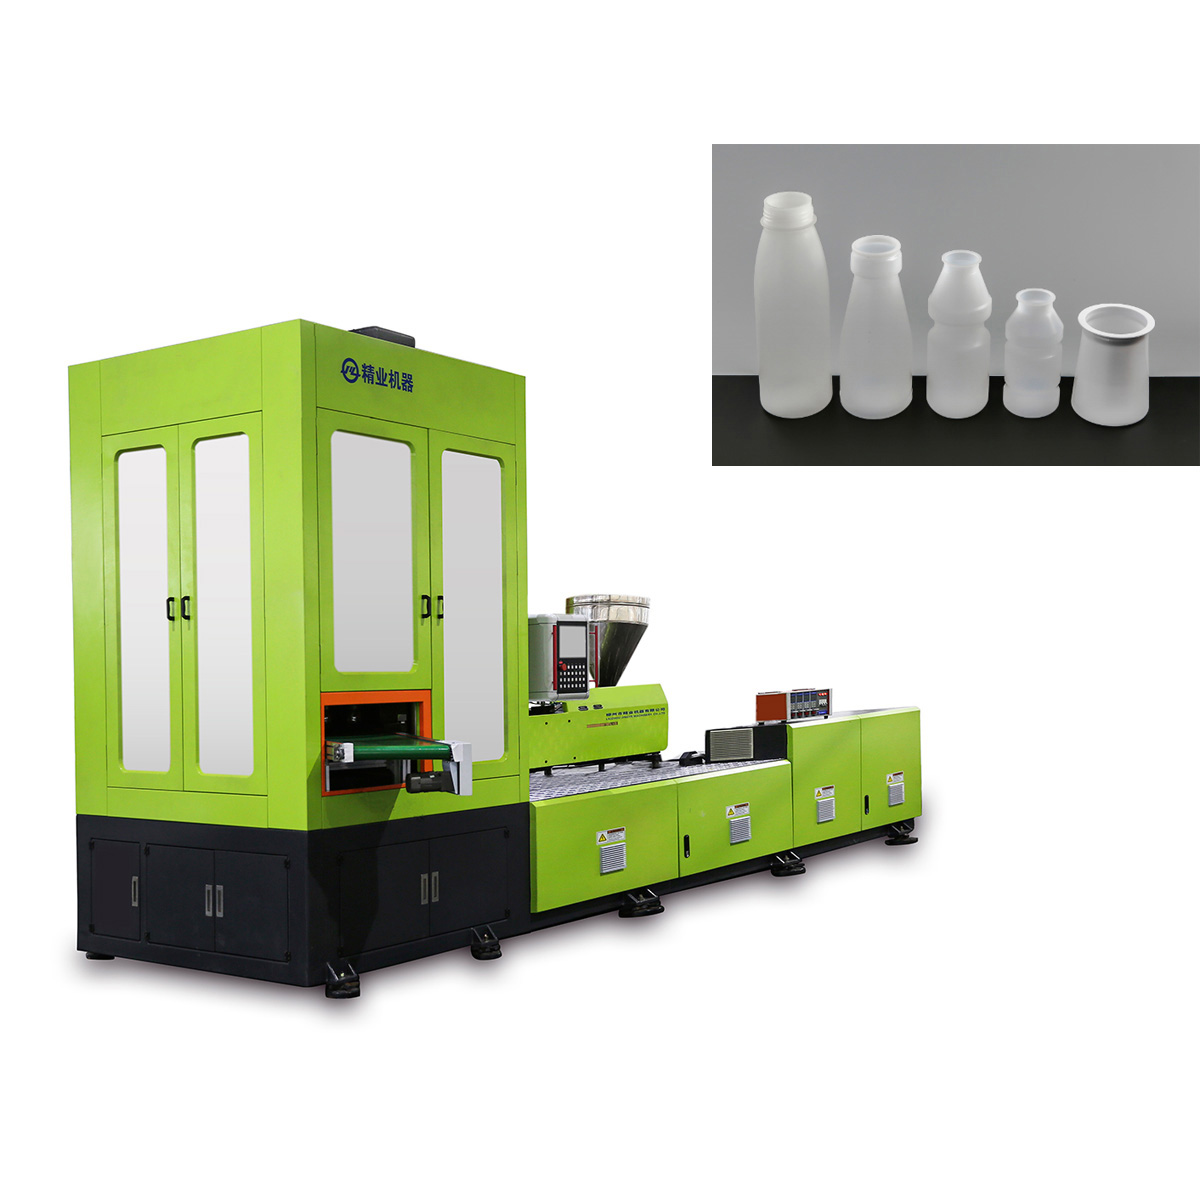 Single Stage Injection Stretch Blow Molding (ISBM) Machine For Making Food / Beverage Bottle